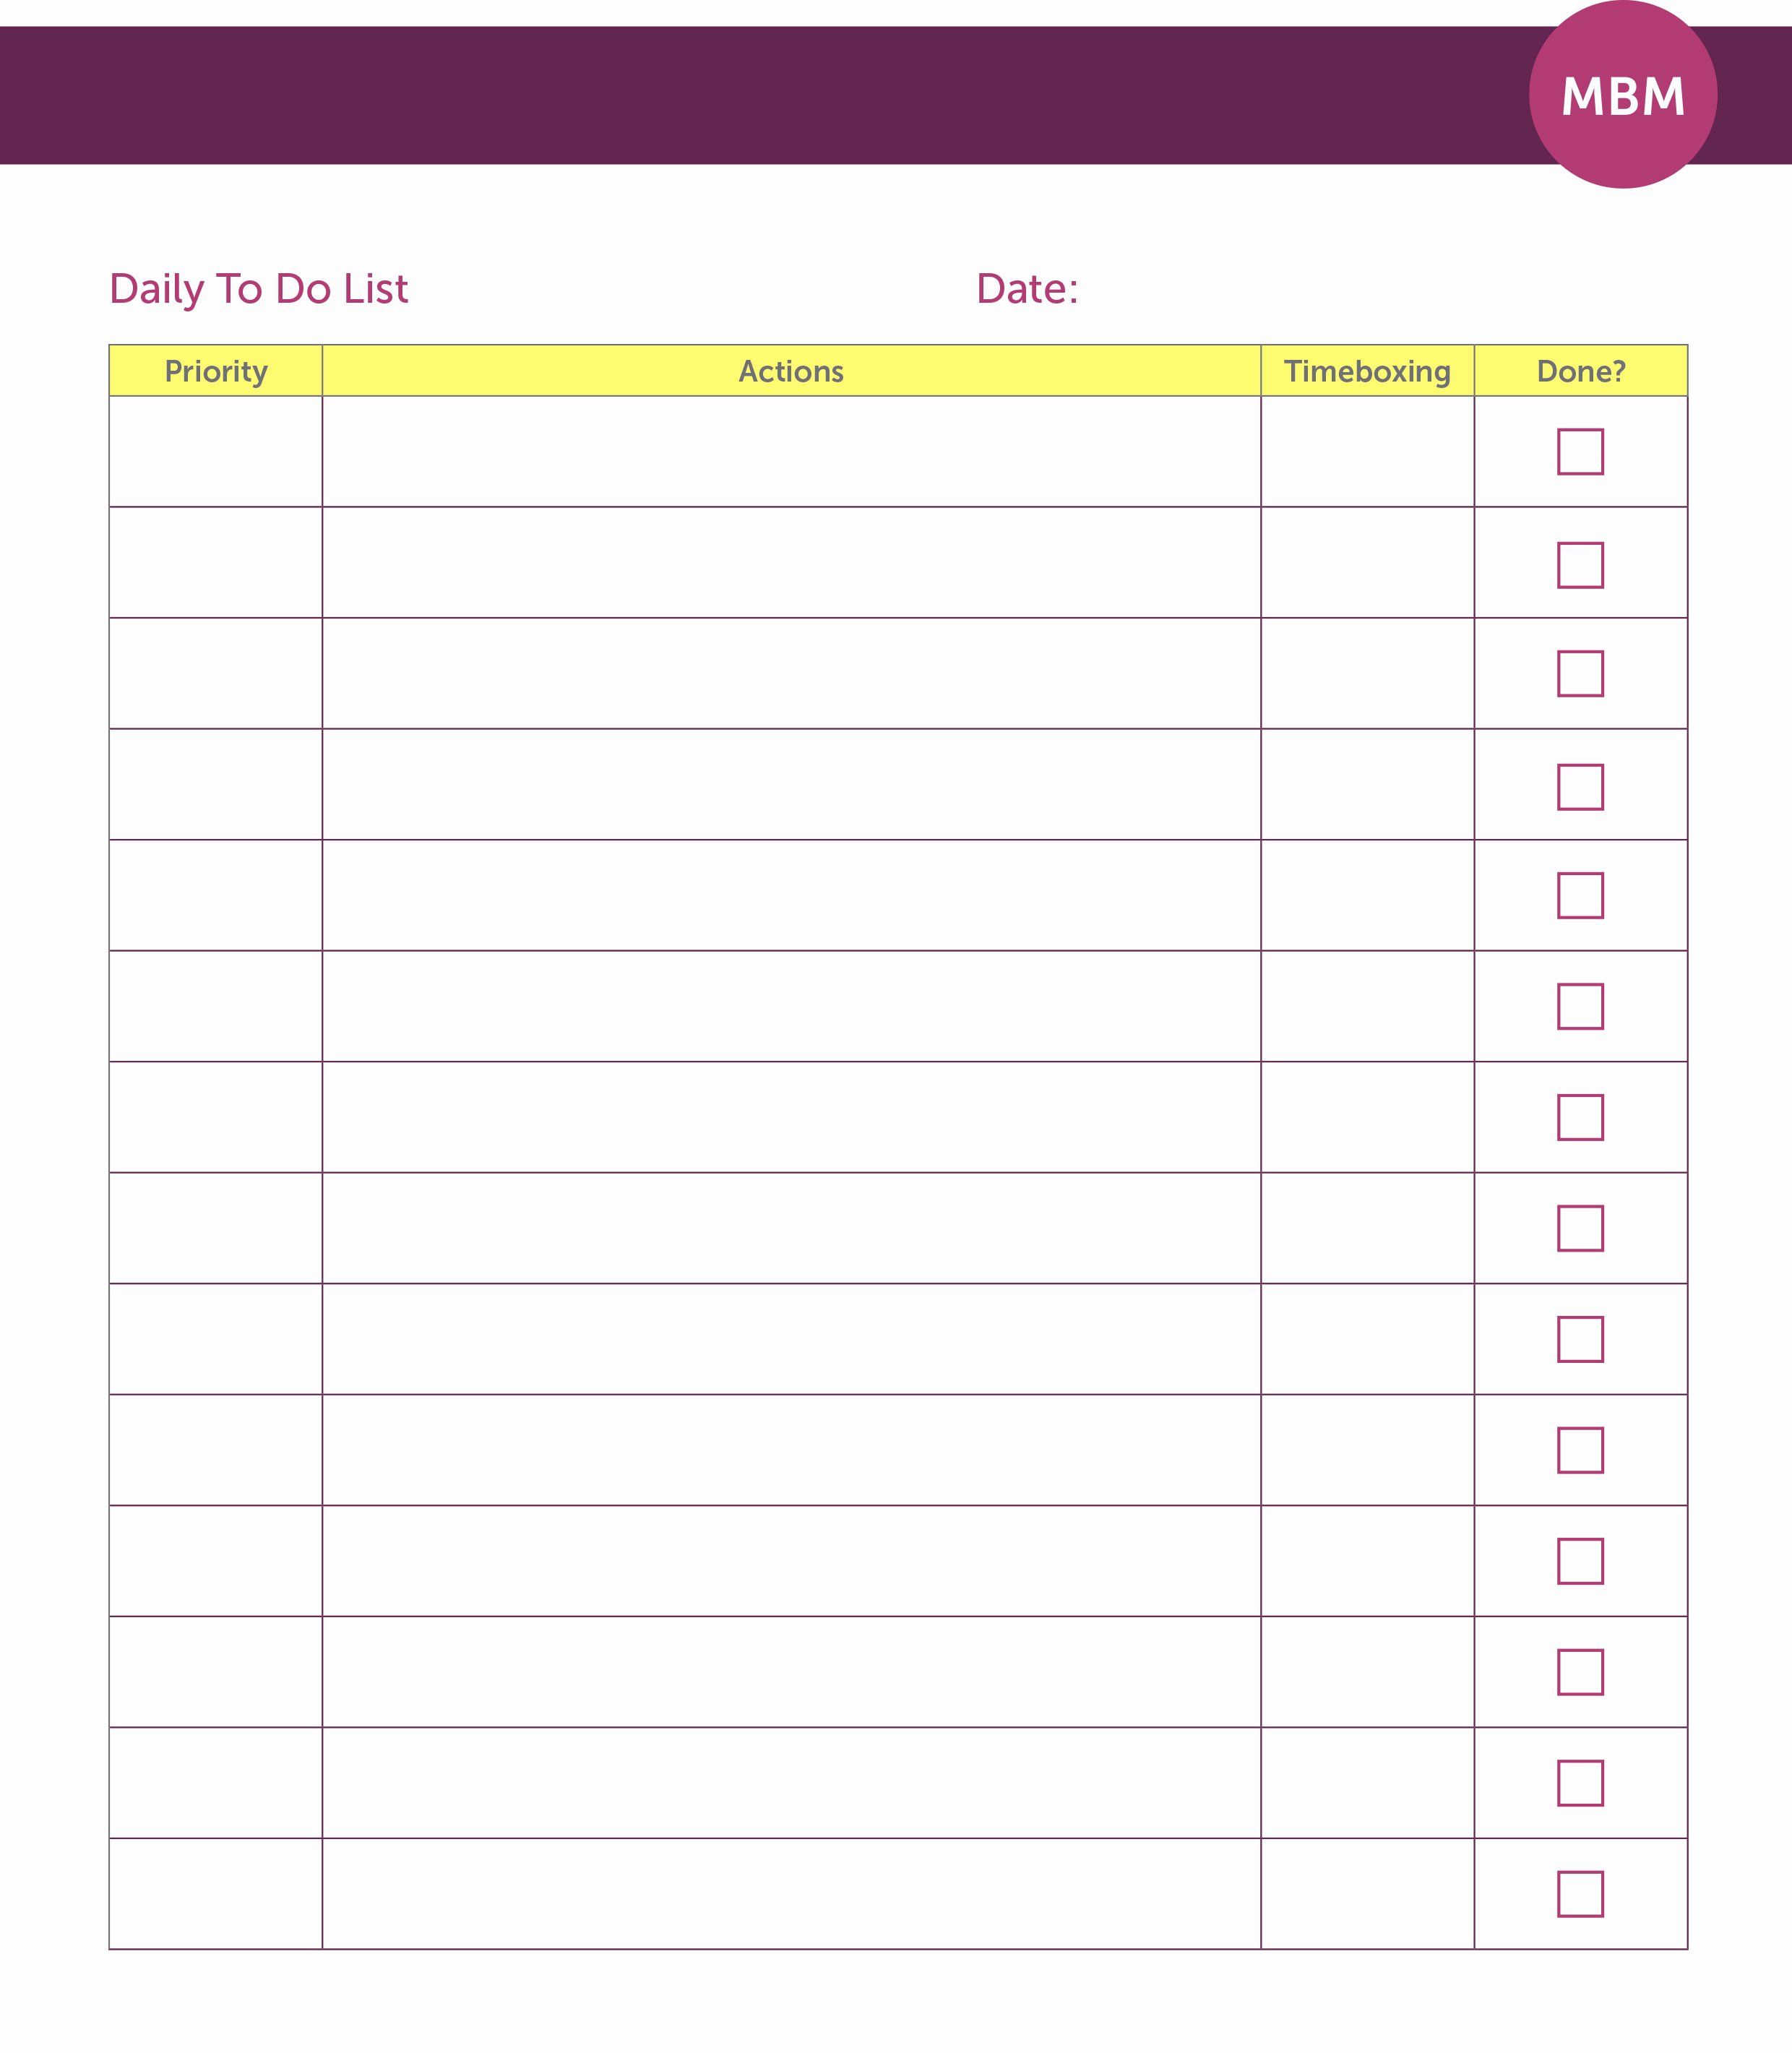 Daily Time Tracking Template Fresh 14 Time Management Templates to Help You Get organised